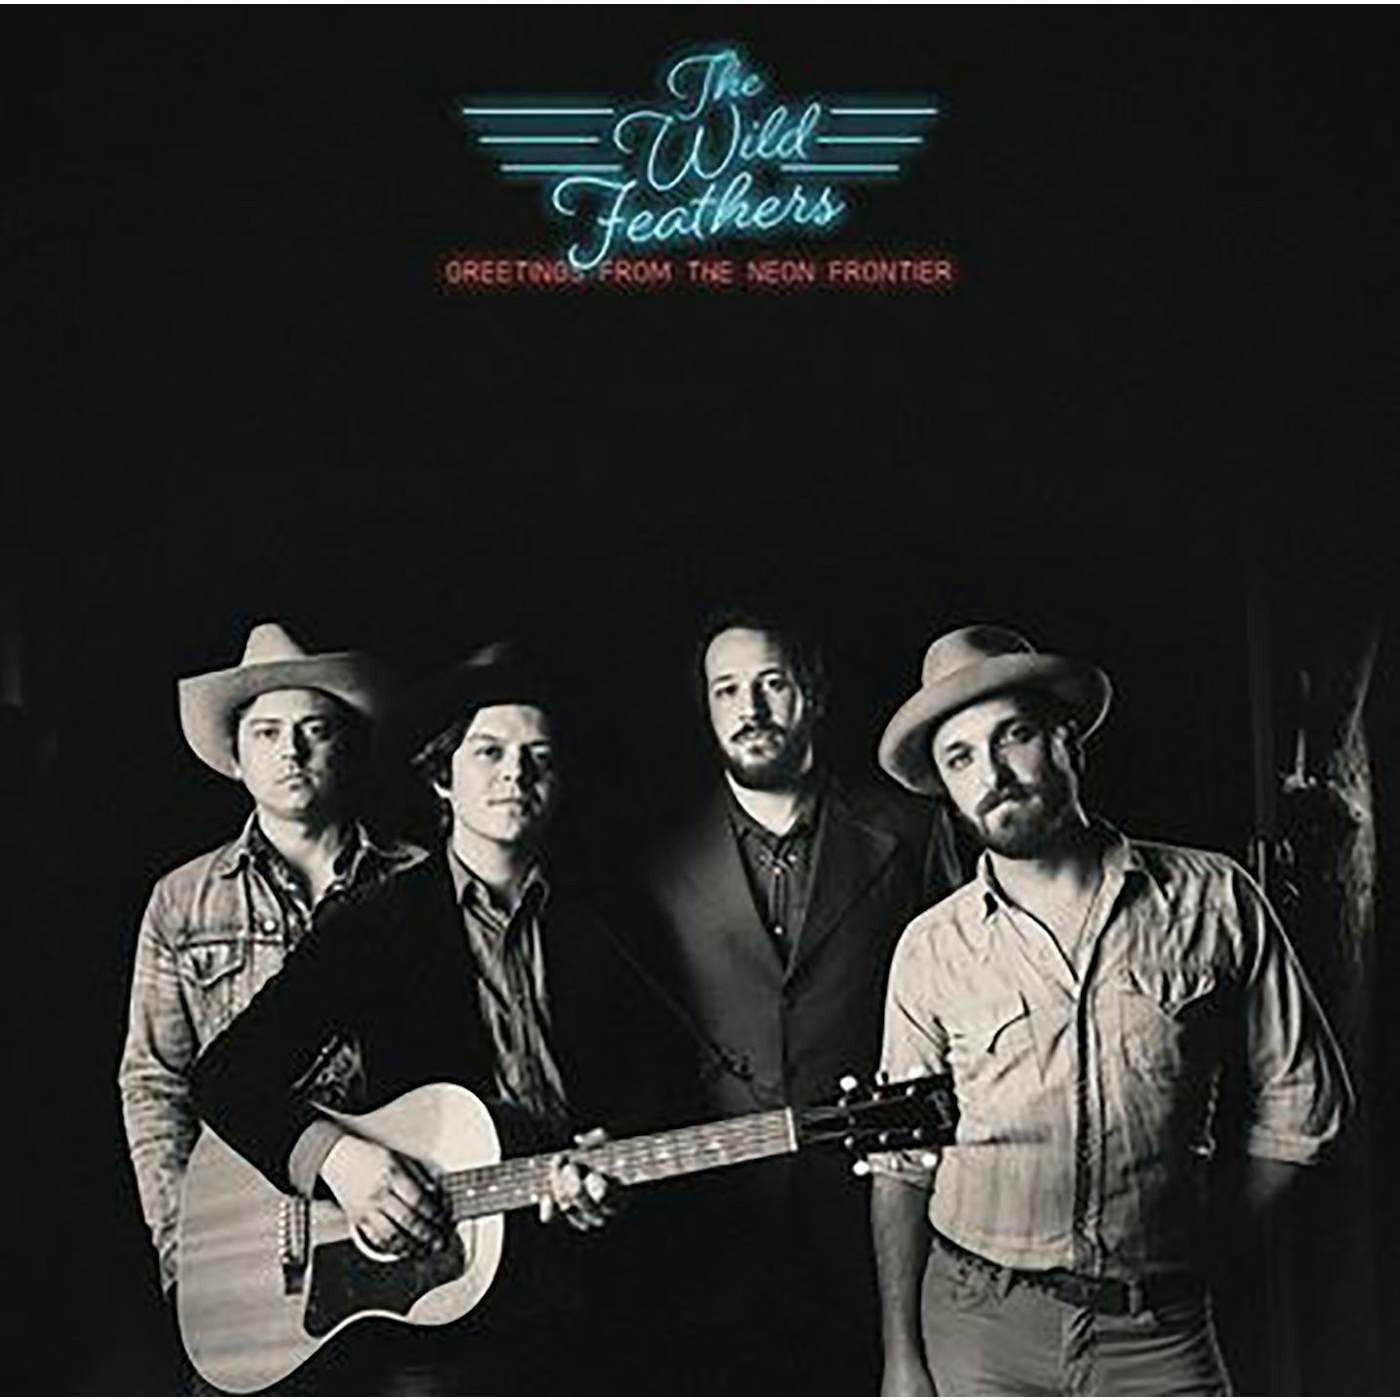 The Wild Feathers Greetings from the Neon Frontier Vinyl Record